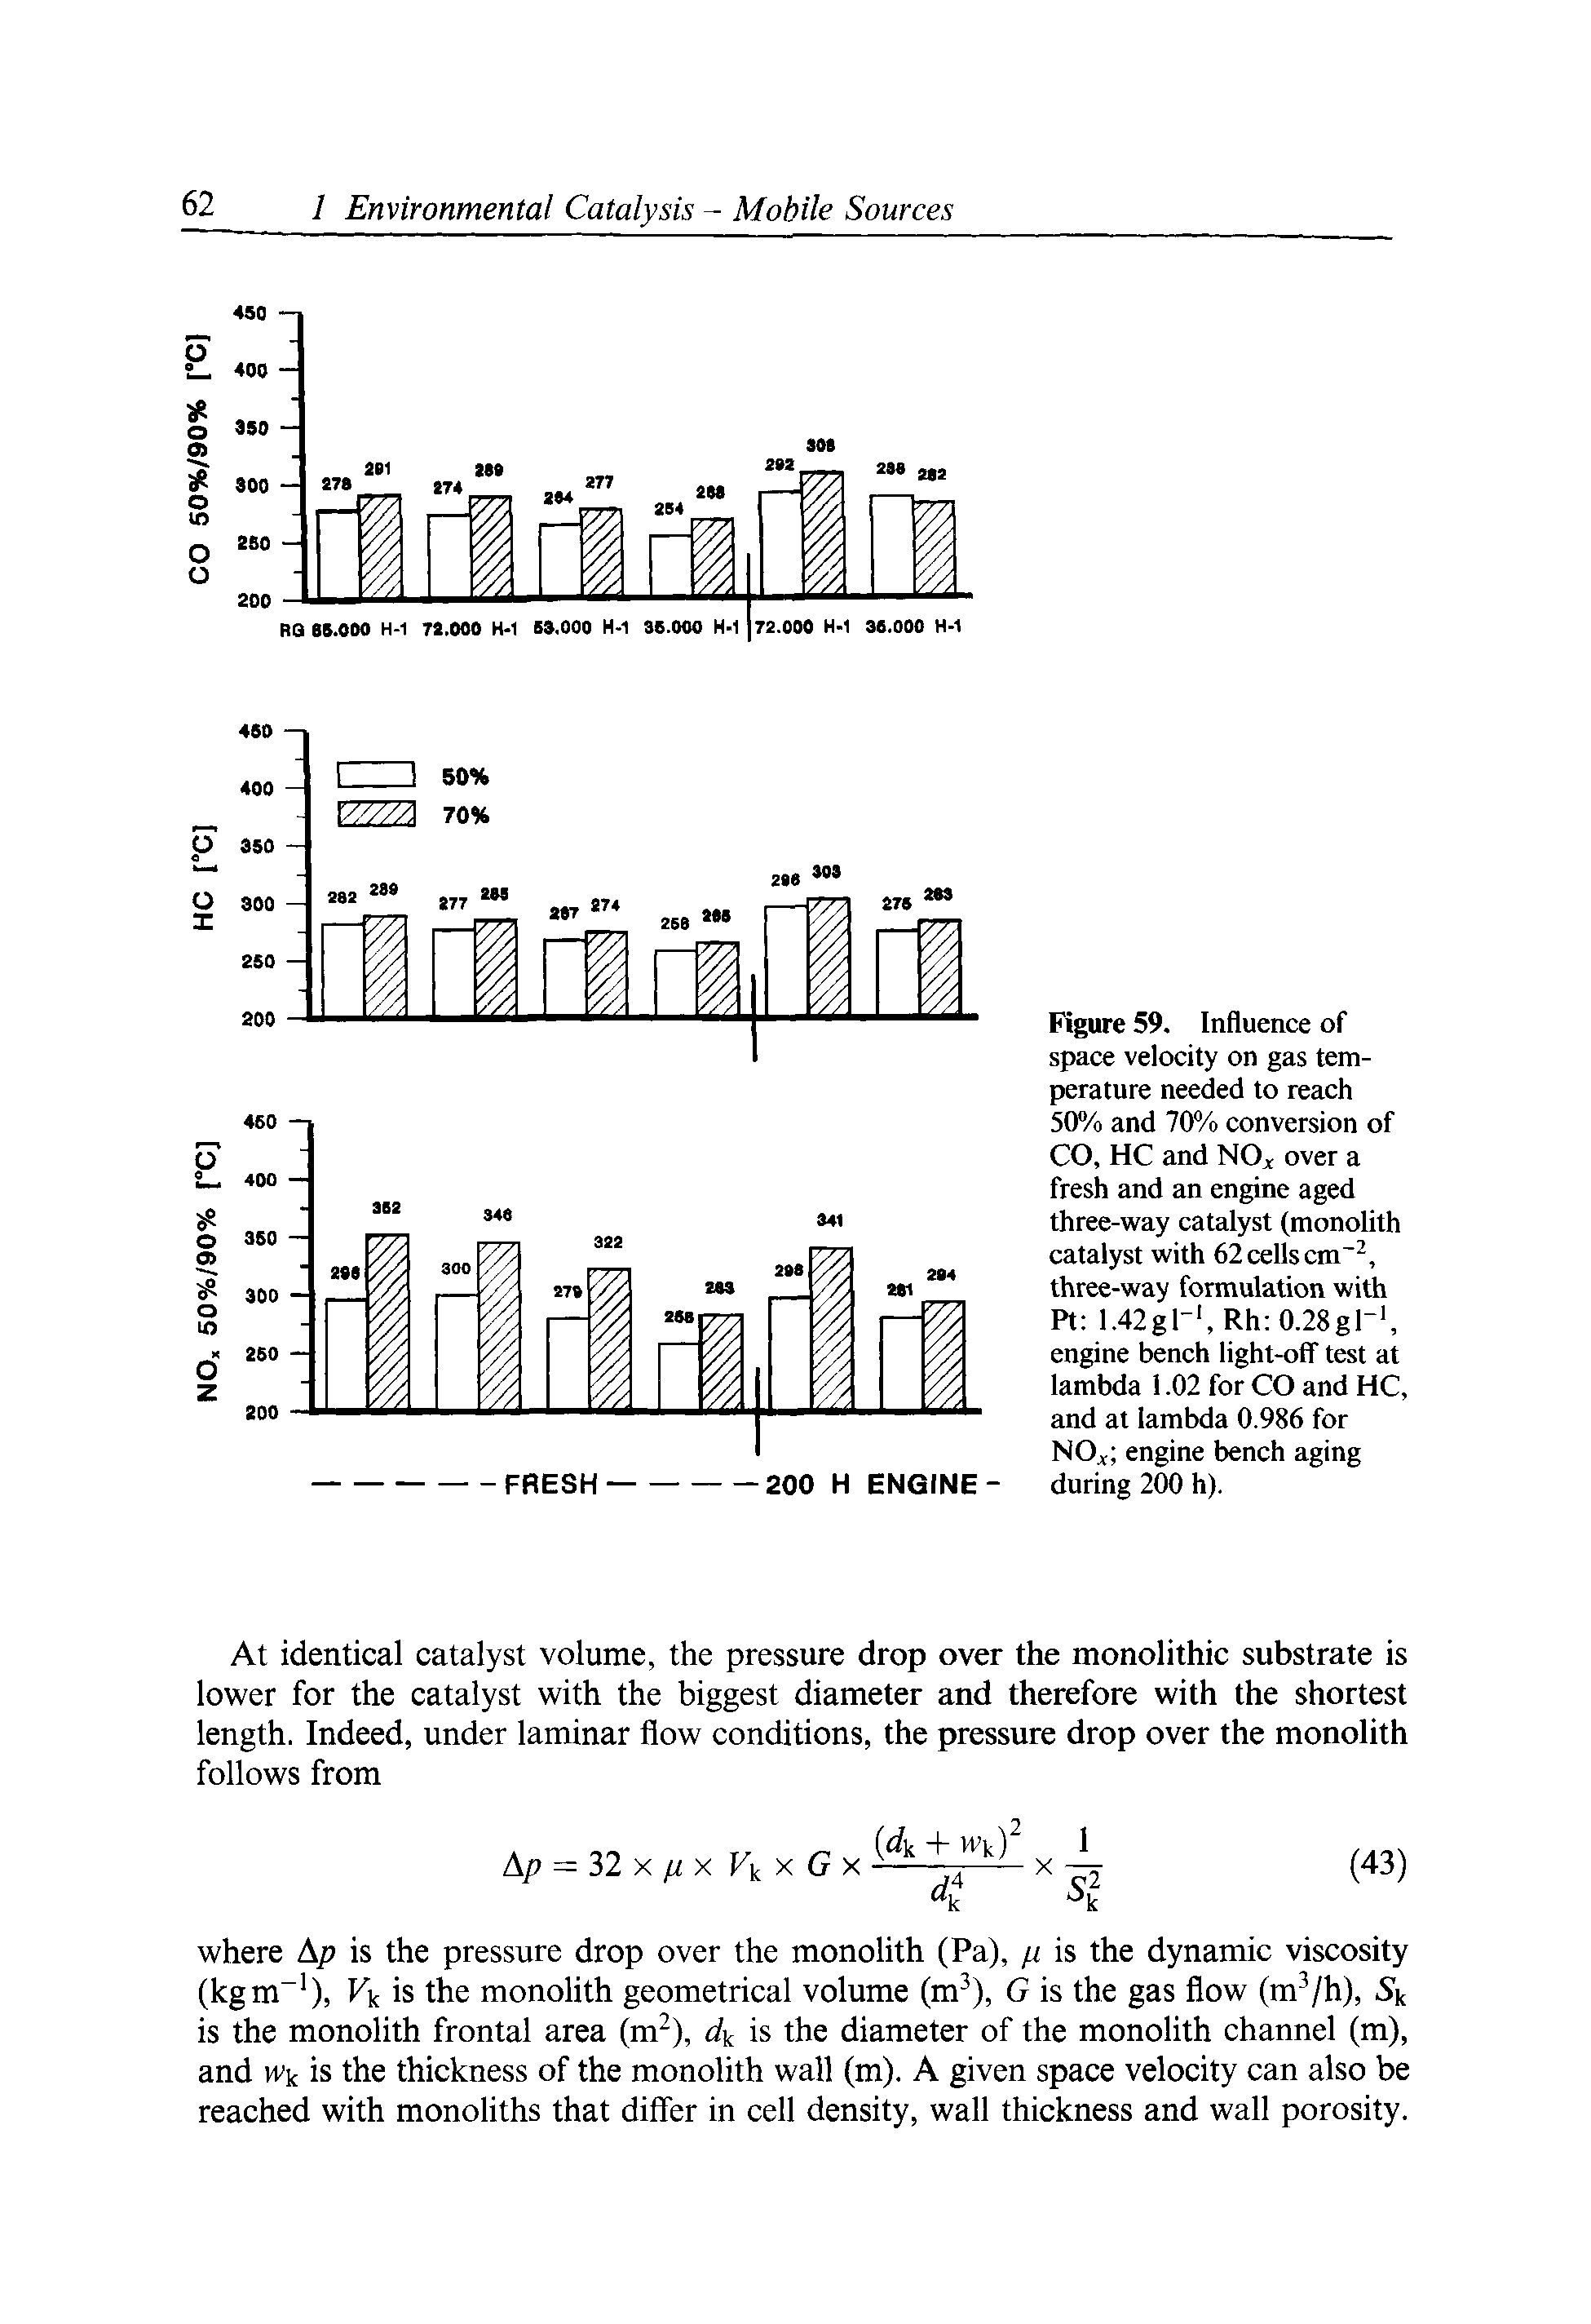 Figure 59. Influence of space velocity on gas temperature needed to reach 50% and 70% conversion of CO, HC and NOjt over a fresh and an engine aged three-way catalyst (monolith catalyst with 62 cells cm, three-way formulation with Pt 1.42gl-, Rh 0.28gl->, engine bench light-off test at lambda 1.02 for CO and HC, and at lambda 0.986 for NO engine bench aging during 200 h).